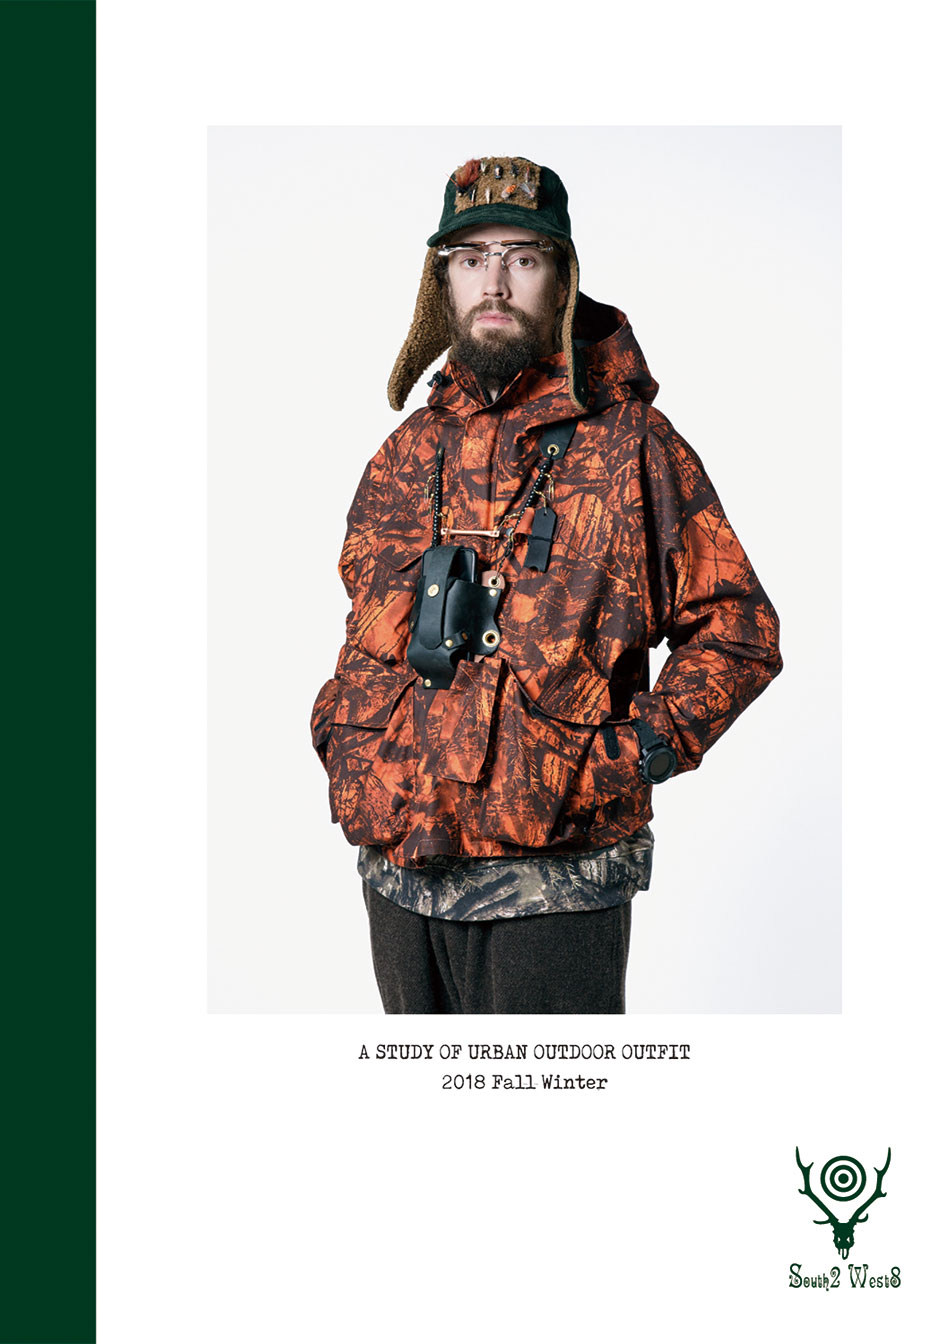 SOUTH2 WEST8 - A STUDY OF OURBAN OUTDOOR OUTFIT 2018 Fall Winter